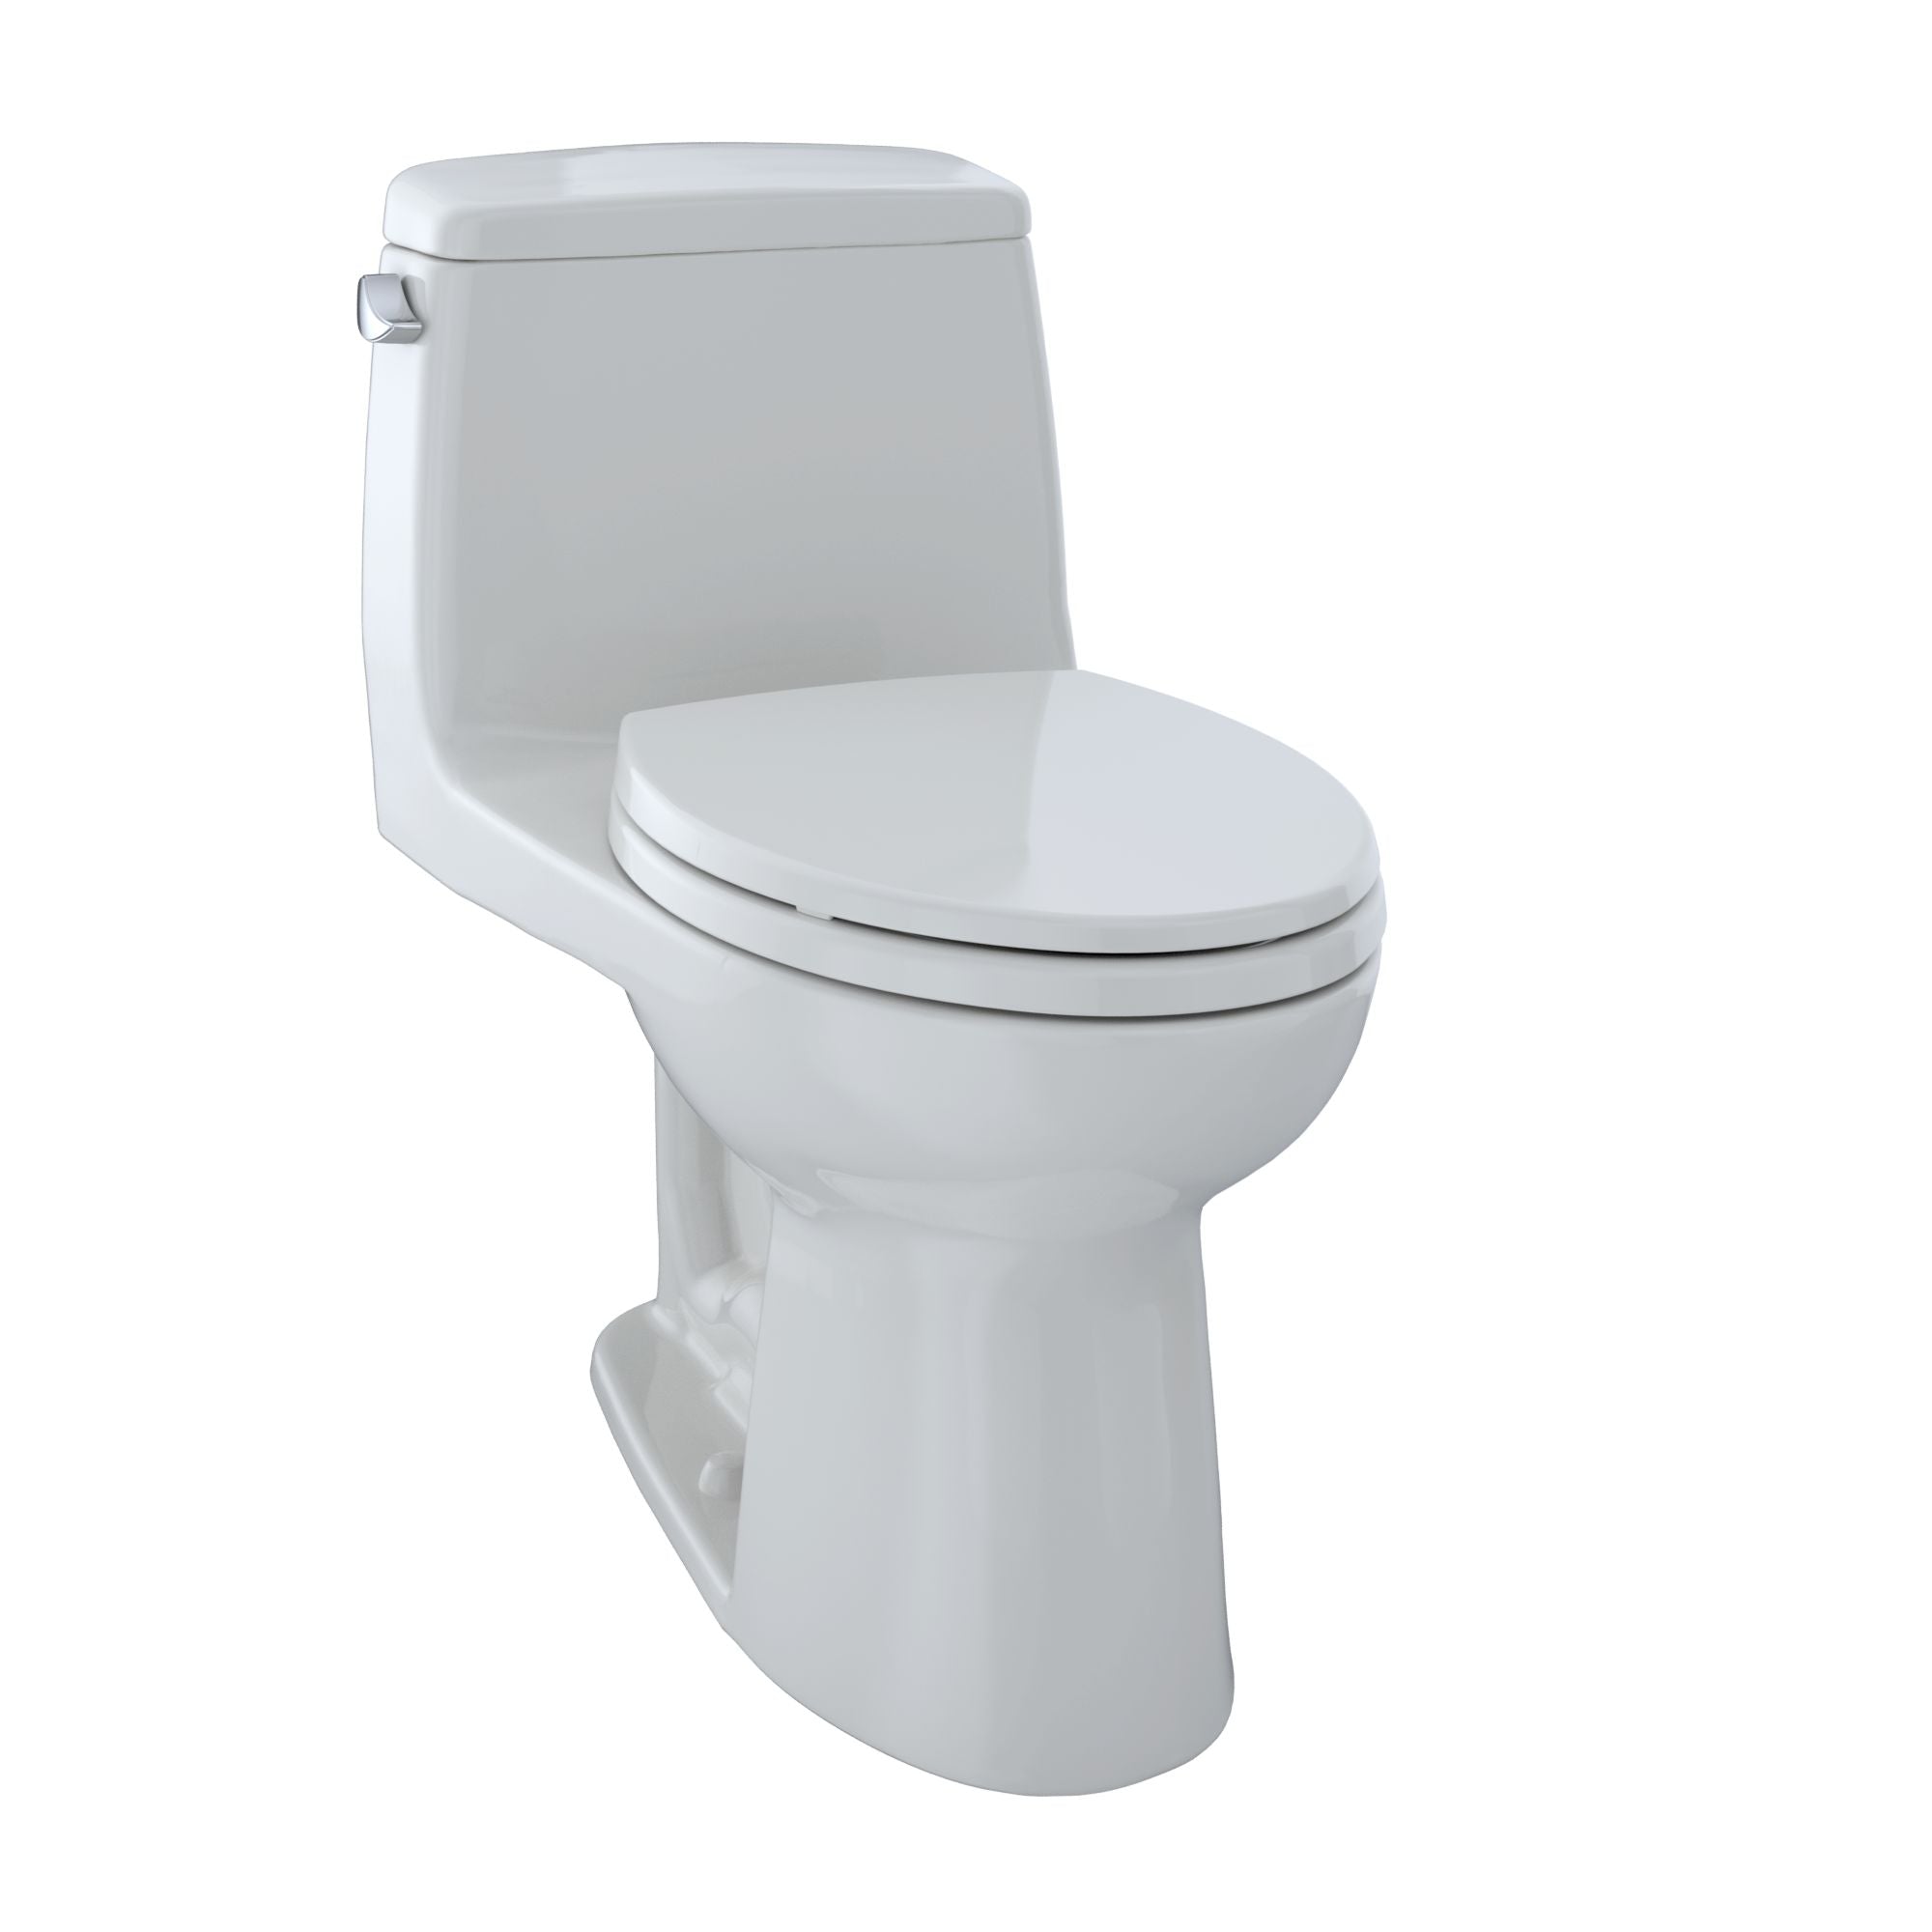 Toto Ultramax One-piece Toilet 1.6 GPF Elongated Bowl